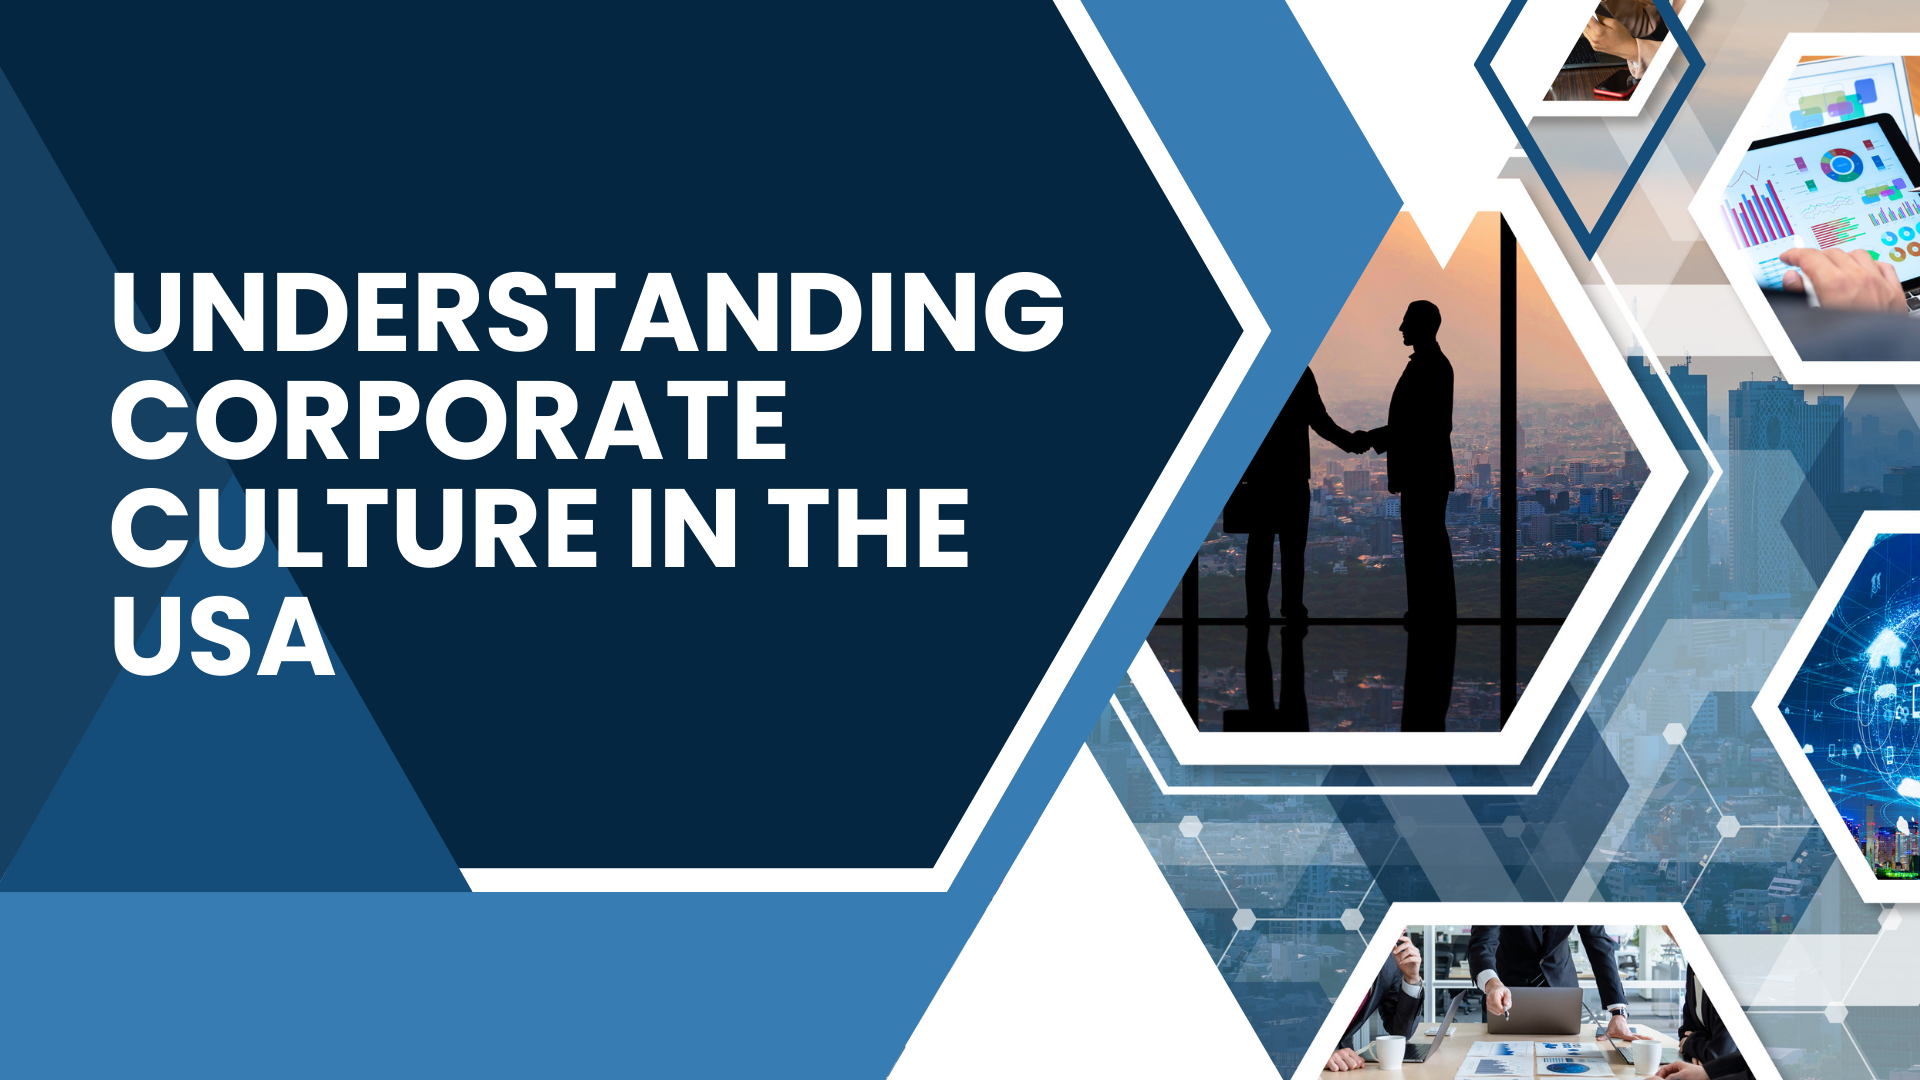 Understanding Corporate Culture in the USA